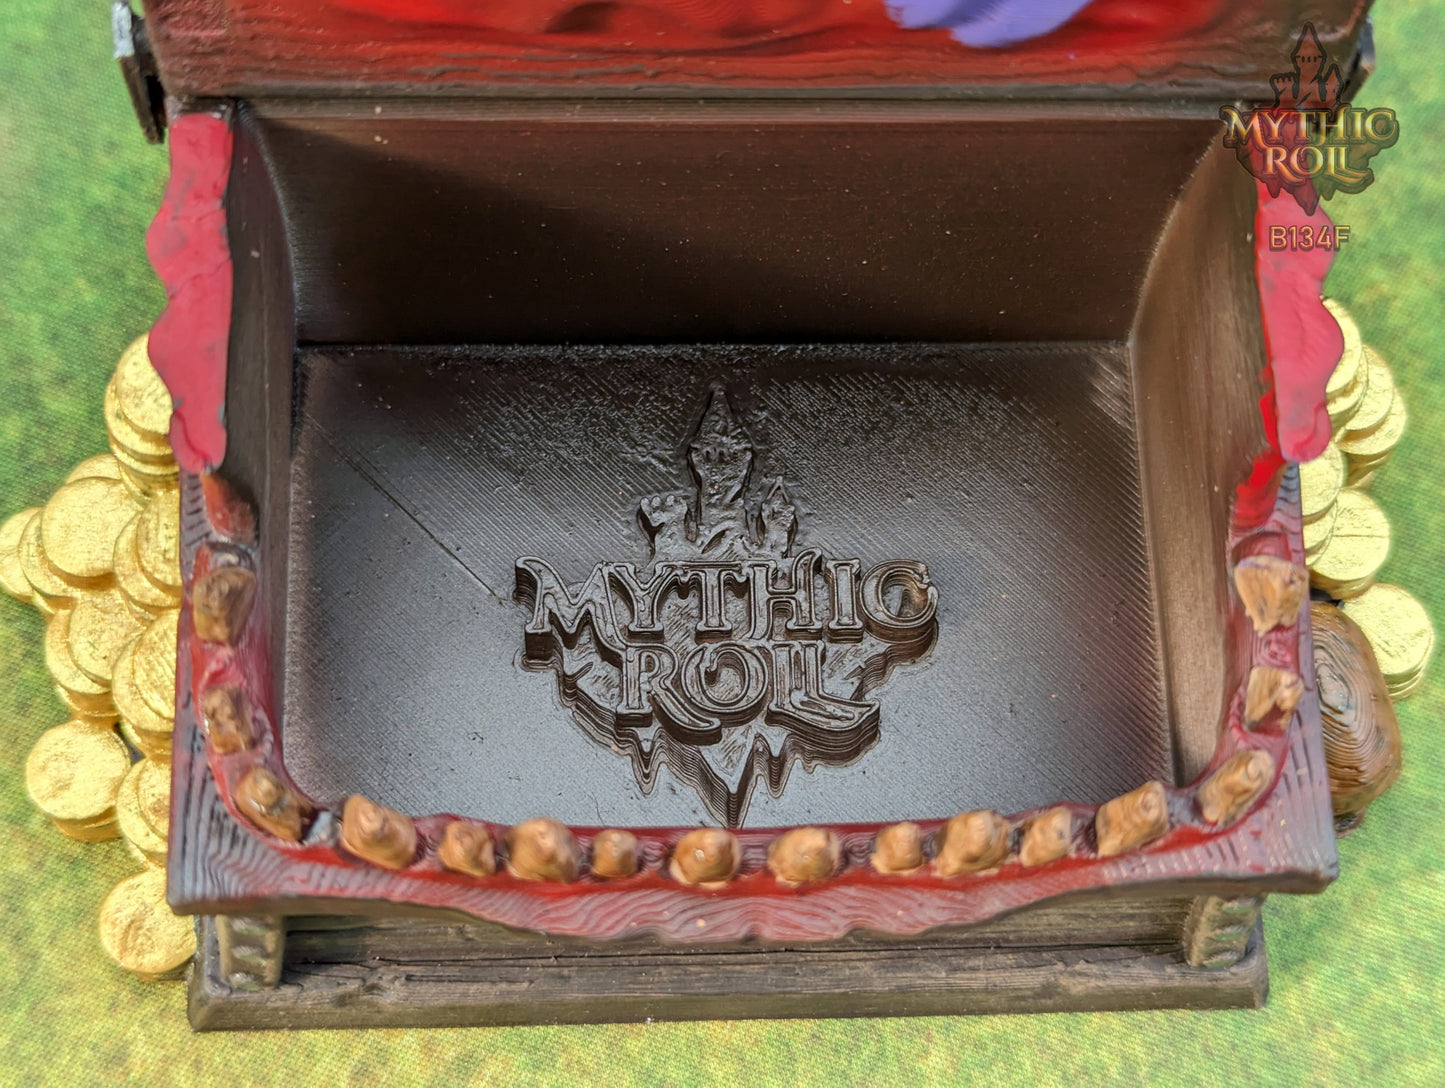 Mimic 3D Printed Dice Box/Jail/Vault/Prison - Mythic Roll - Unchained Games - RPG Gaming Cosplay - Dungeons and Dragons DnD Wargaming.